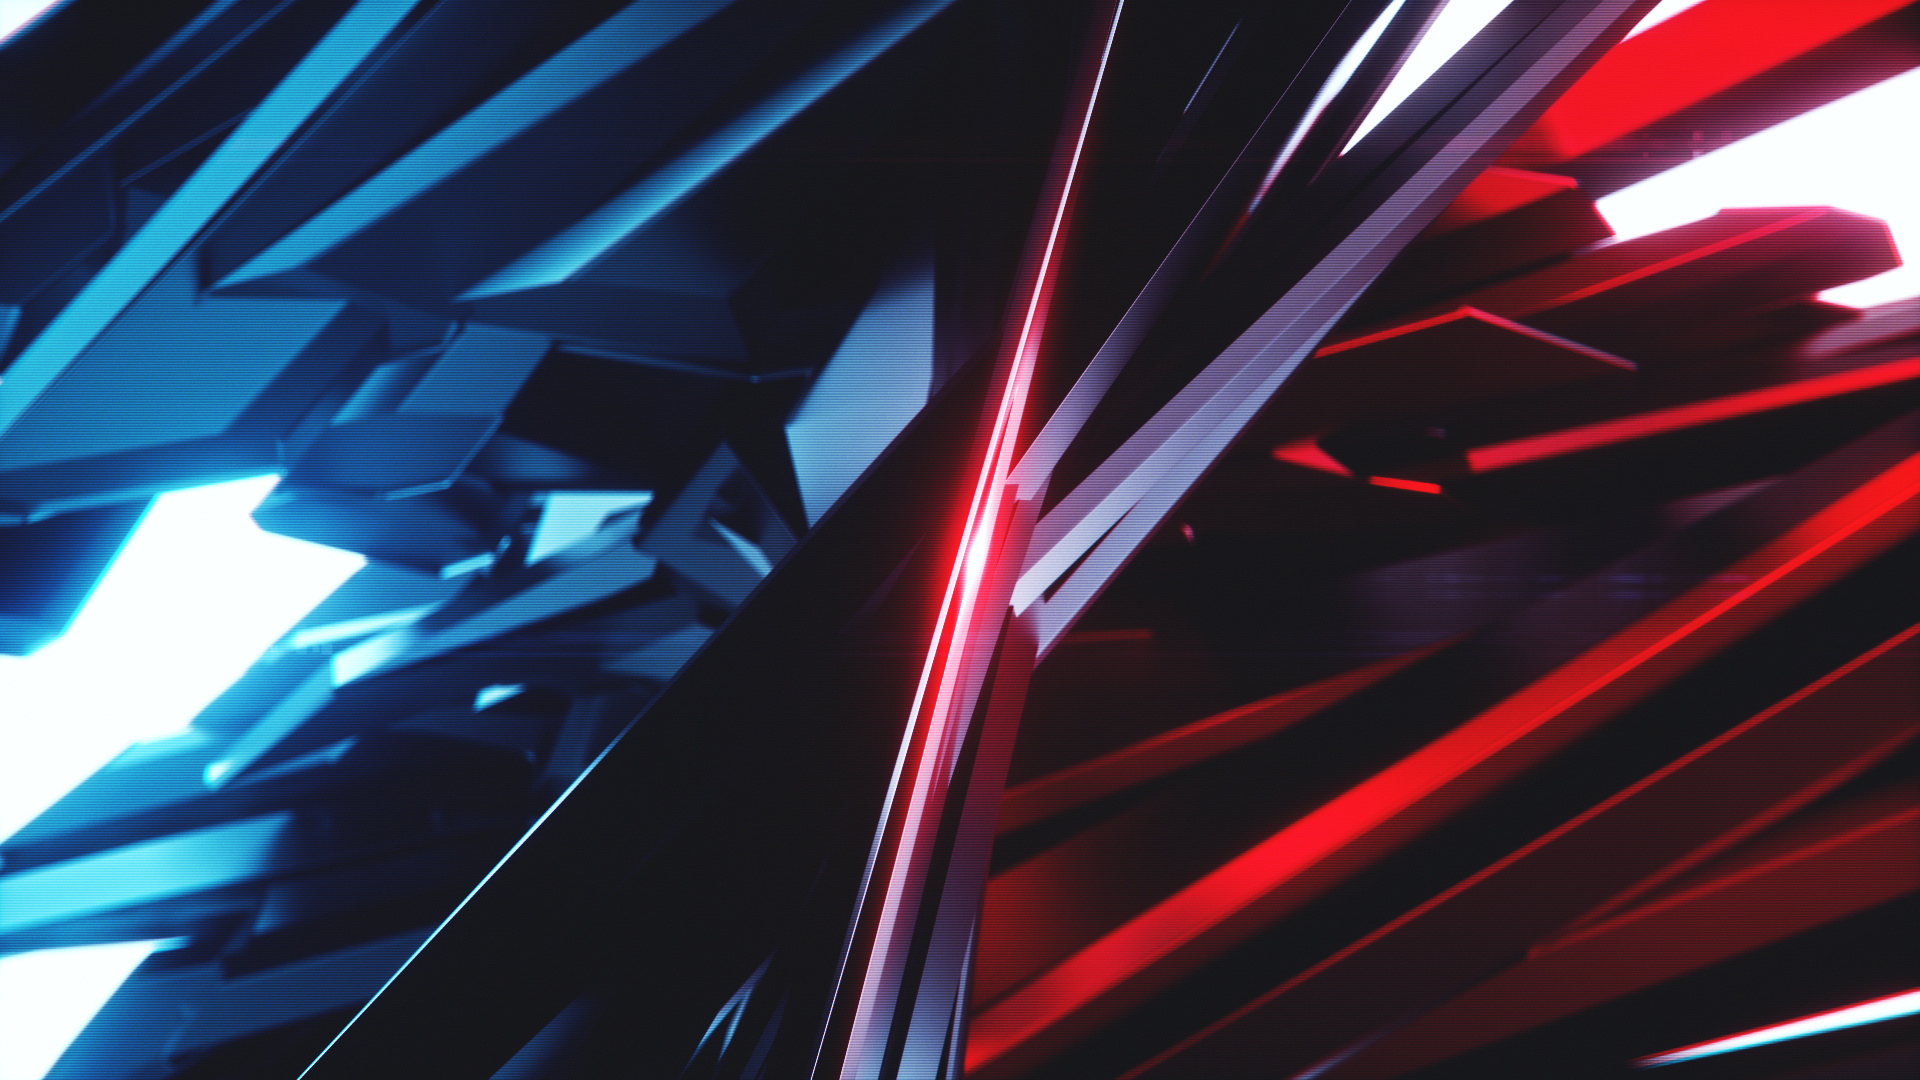 Download wallpaper 1920x1200 blue vs red, pattern, dark, abstract, 16:10  widescreen 1920x1200 hd background, 7957